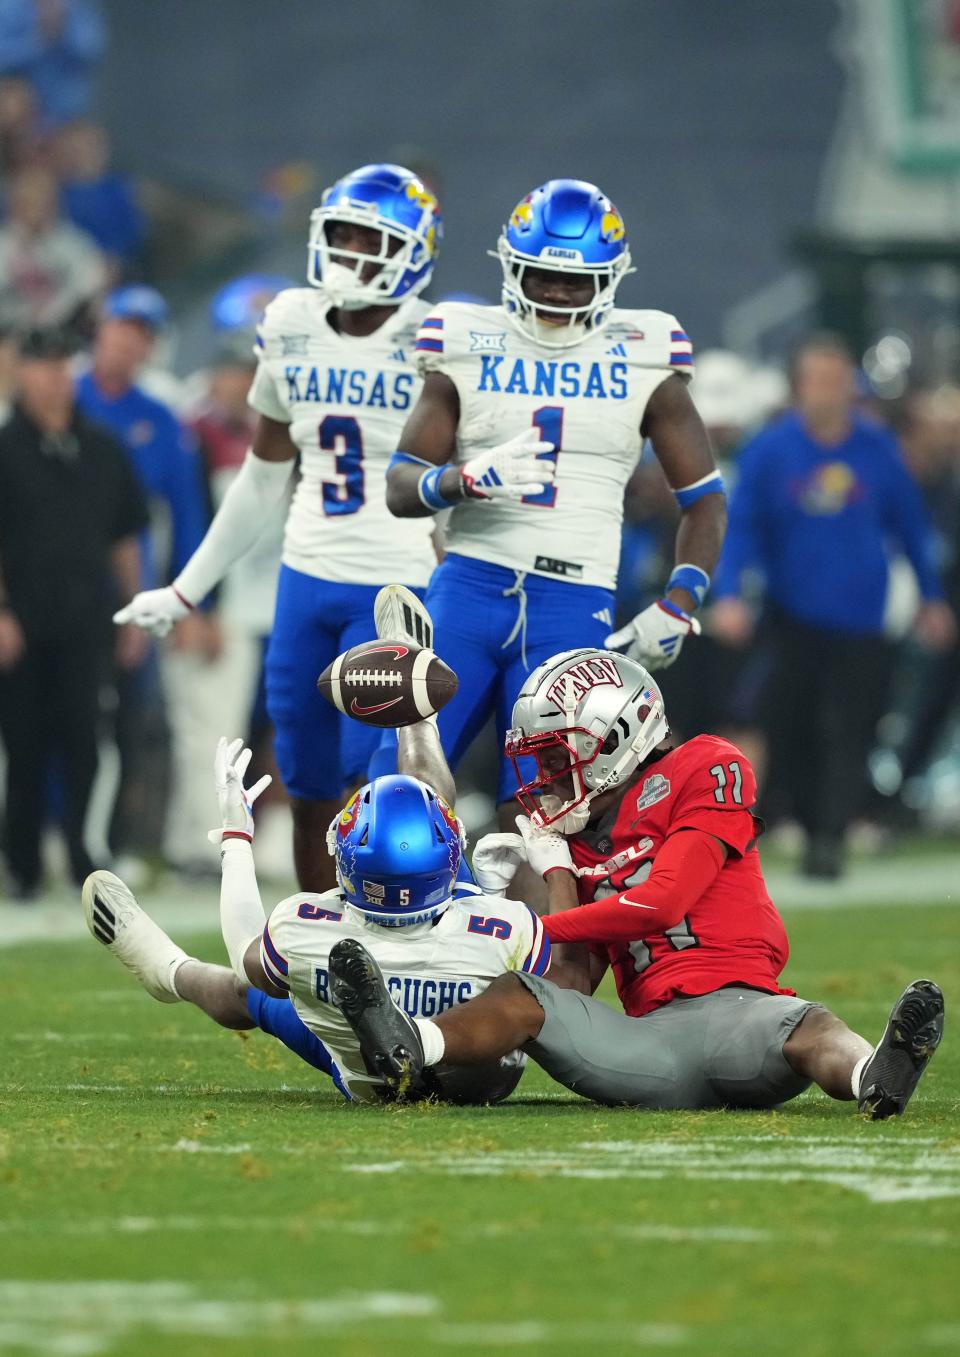 Dec 26, 2023; Phoenix, AZ, USA; Kansas Jayhawks wide receiver Luke Grimm (11) and UNLV Rebels linebacker Zavier Carter (11) go after the ball during the first half at Chase Field. Mandatory Credit: Joe Camporeale-USA TODAY Sports